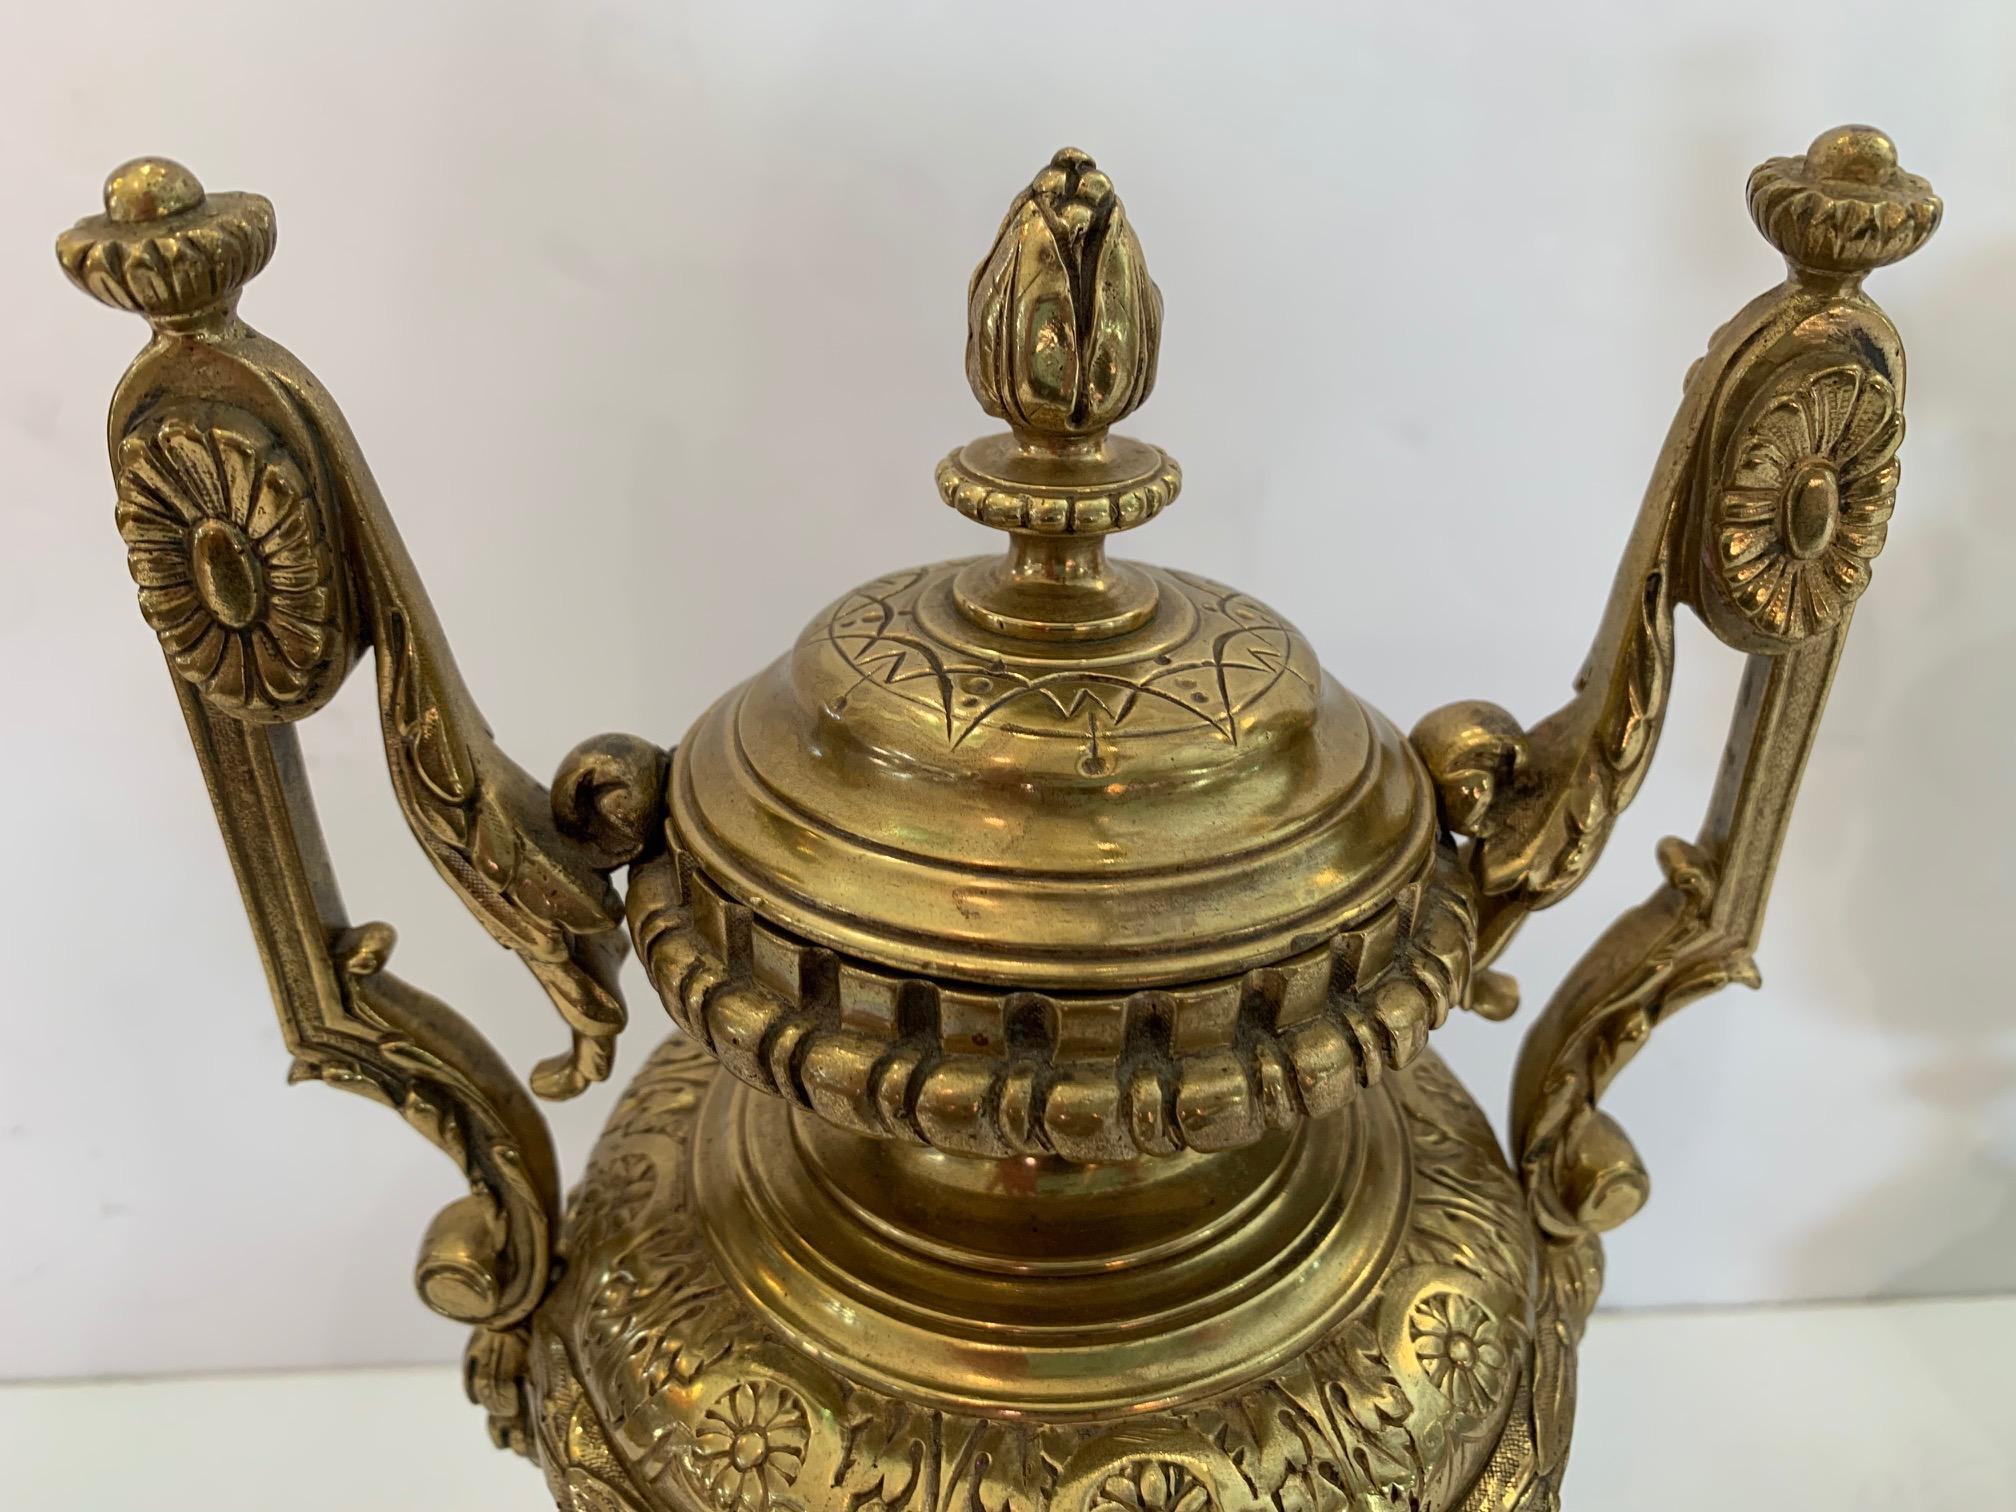 Pair of Classical Revival style continental relief cast brass double-handled covered urns having rosette and scroll handles with dental molded frame top finial lid over a relief cast body of scrolling grapevines and grapes, raised on a stepped foot